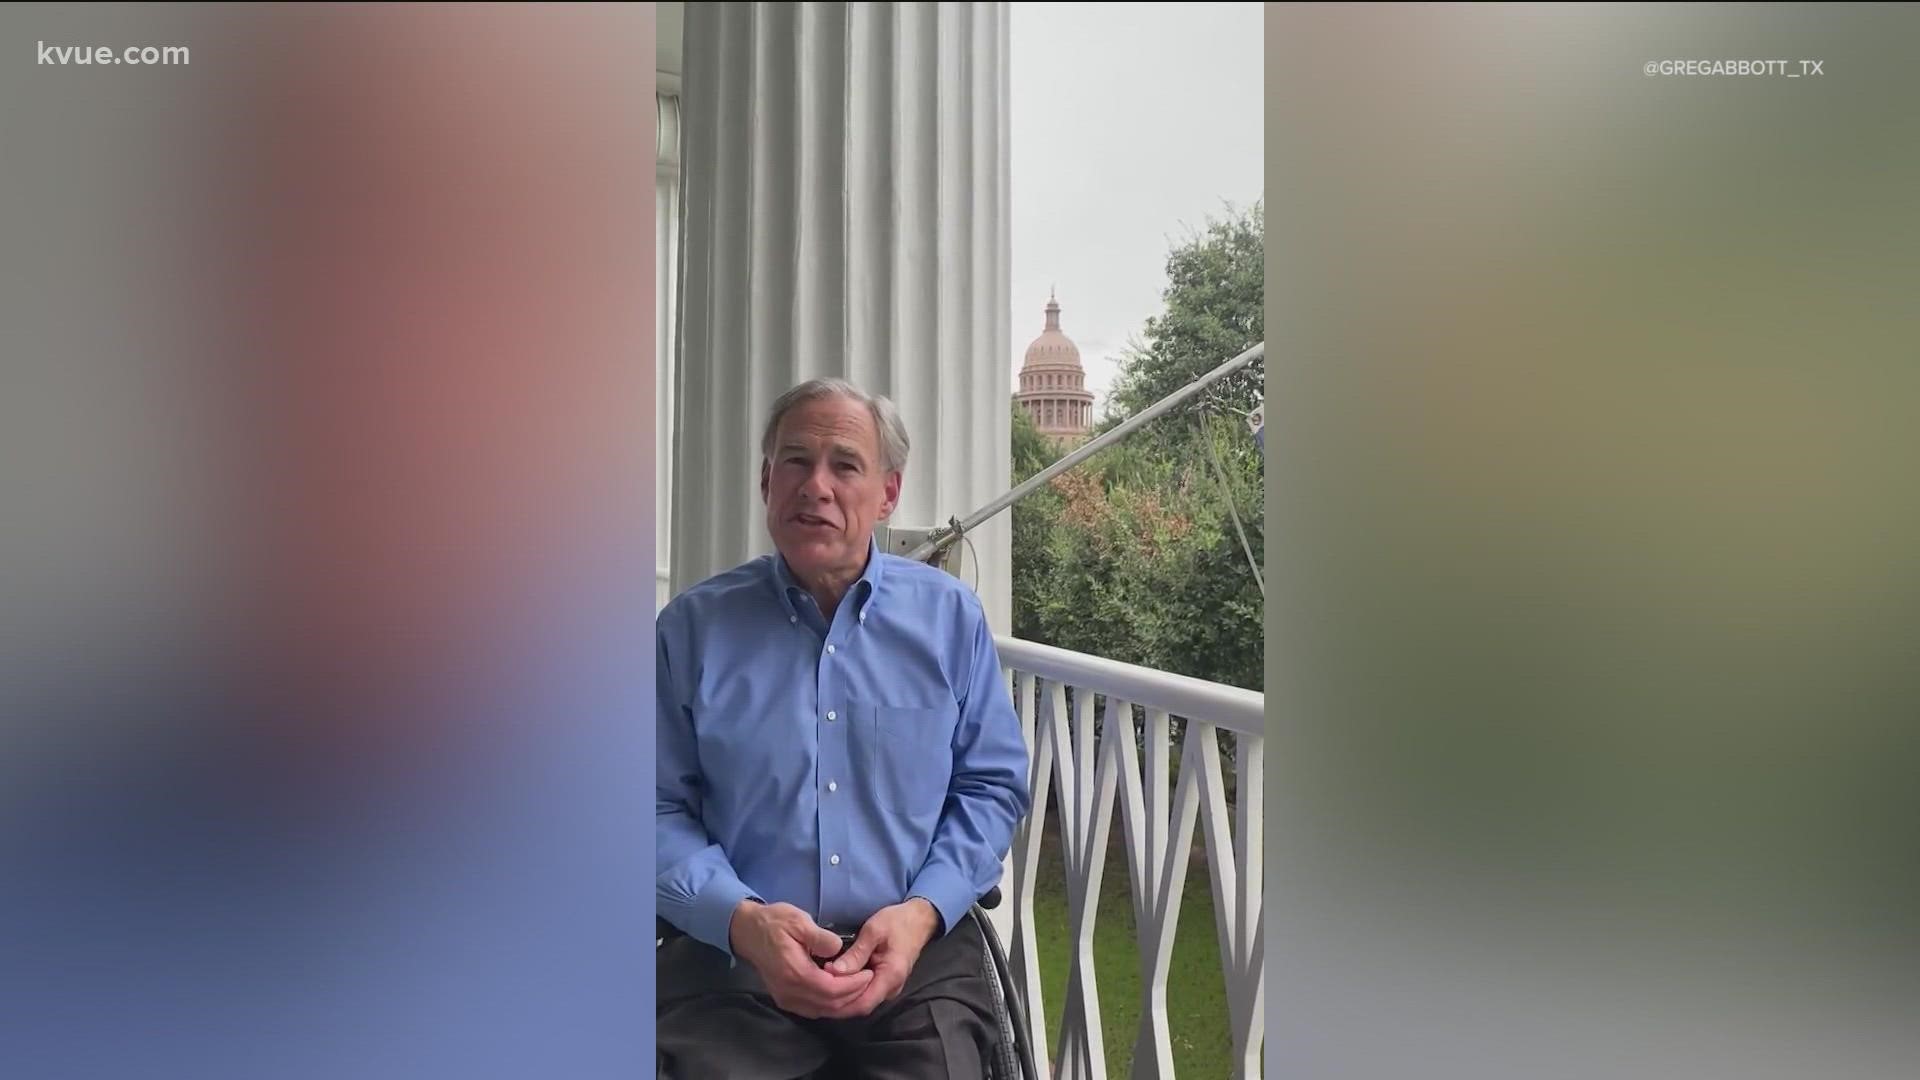 Gov. Greg Abbott has tested positive for COVID-19. He said the vaccine may be why he has no symptoms.